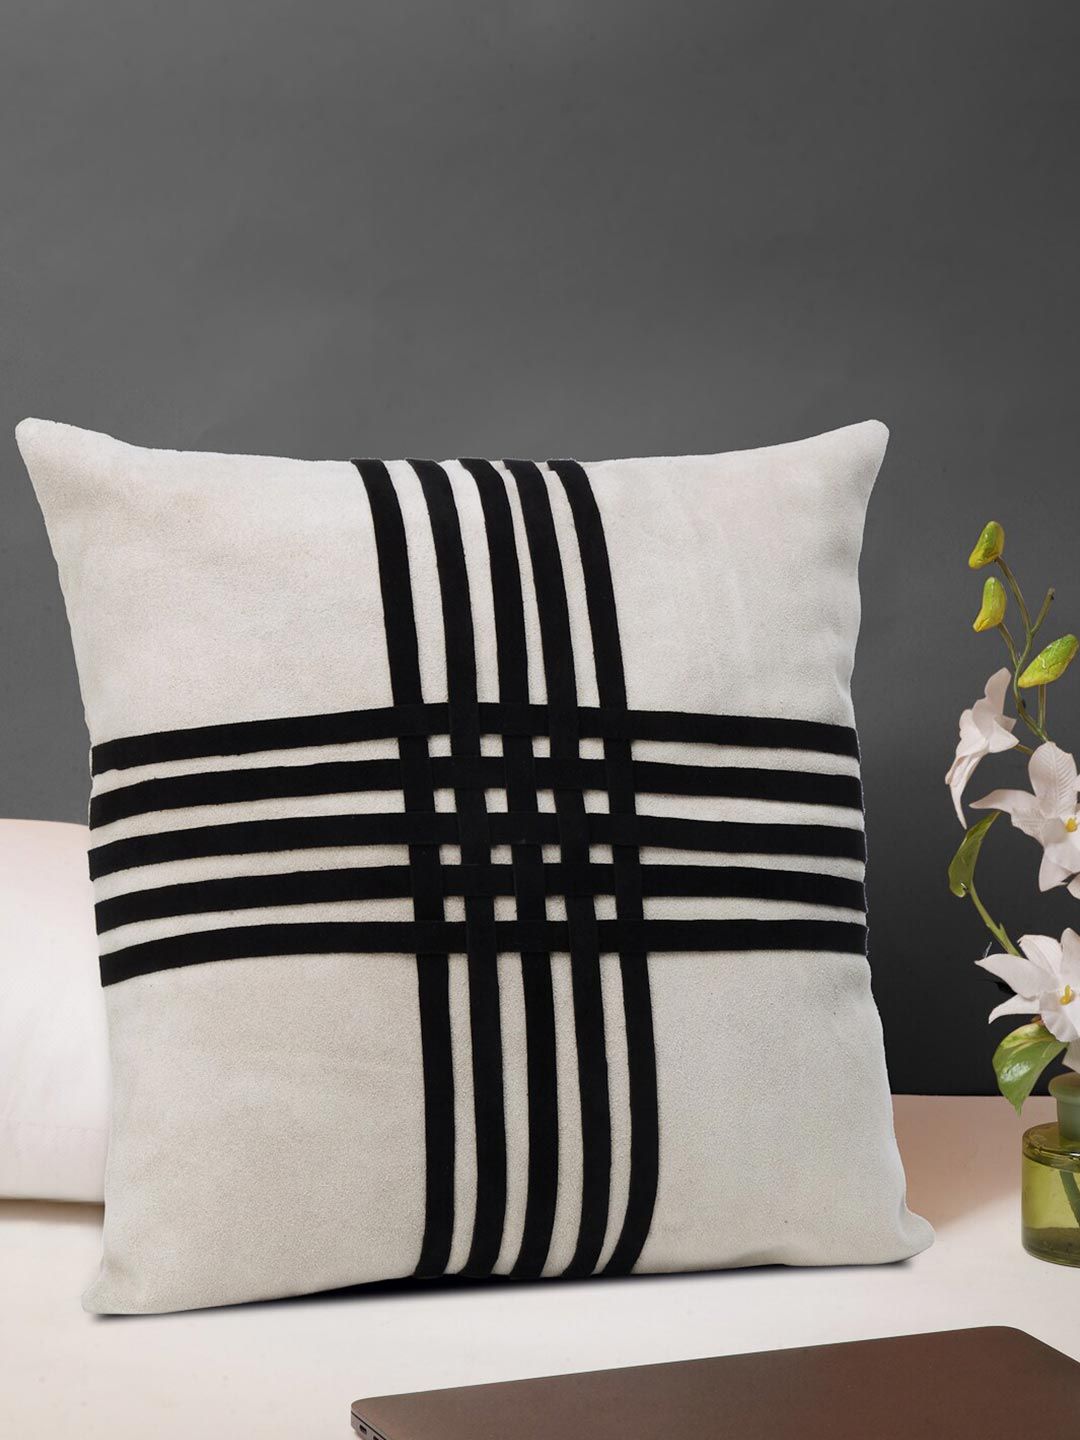 IMUR Beige & Black Checked Leather Square Cushion Covers Price in India